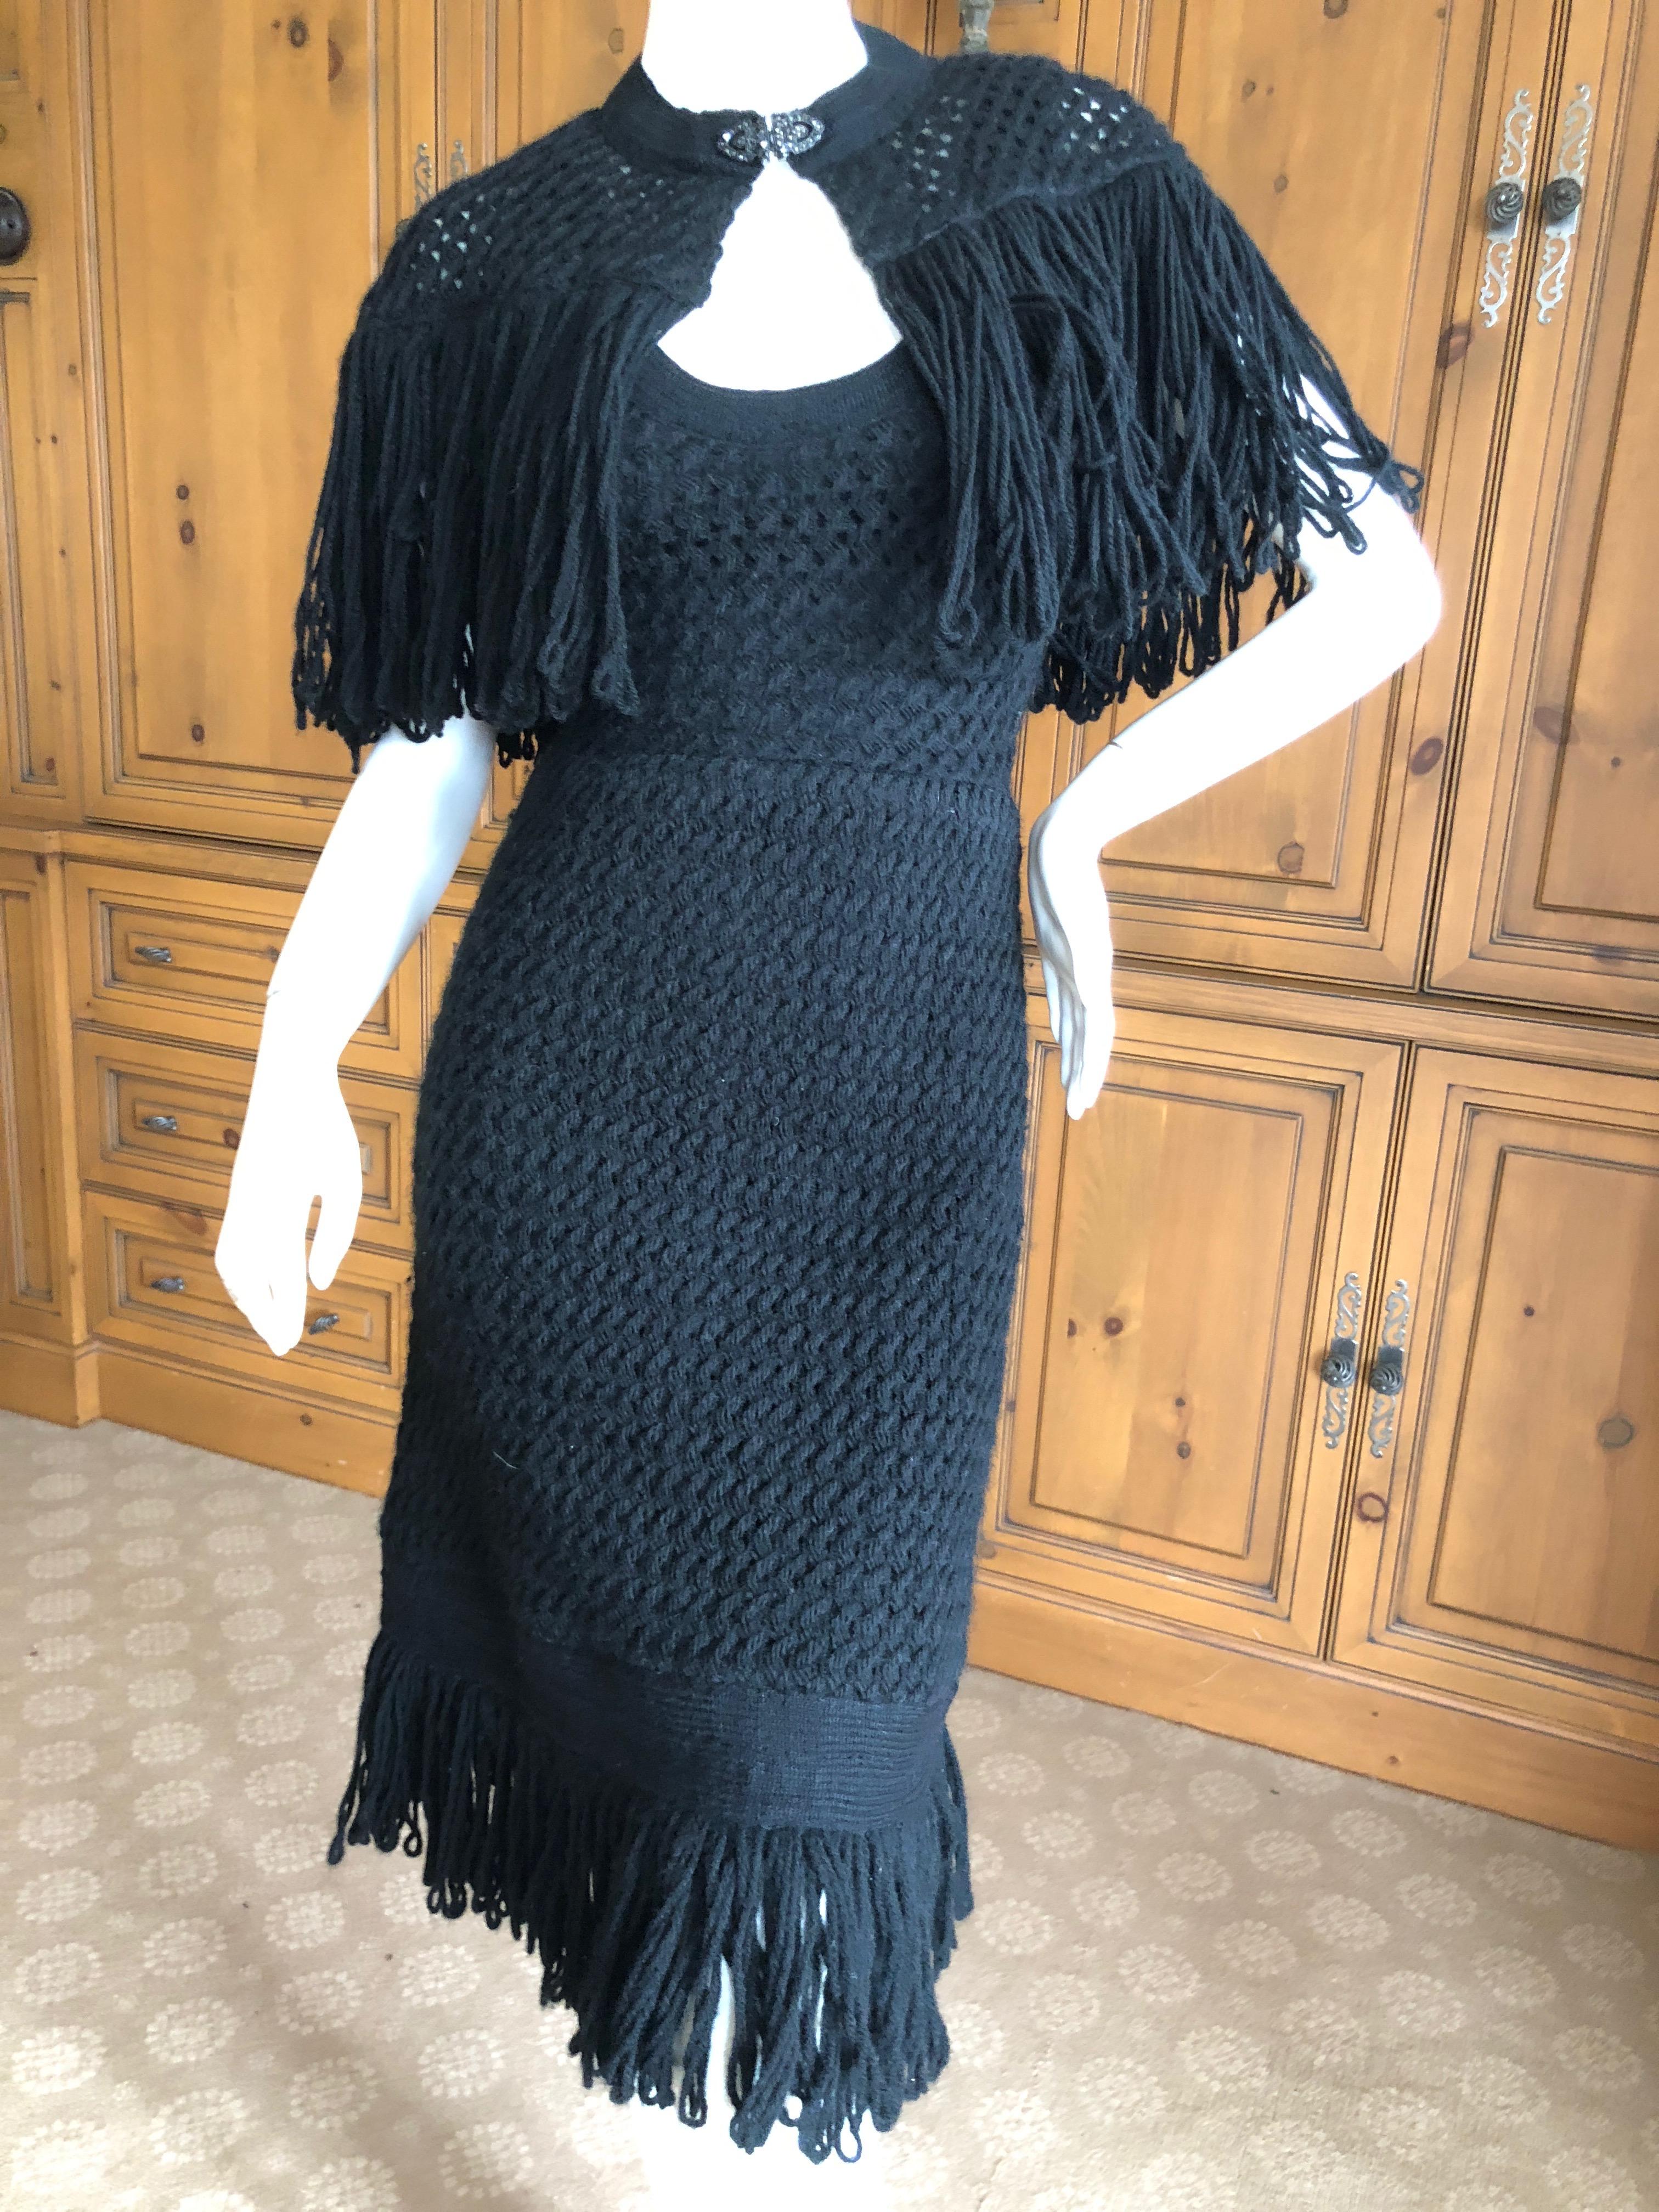 Cardinali Black Silk Lined Crochet Dress with Matching Fringed Shawl Fall 1971  For Sale 4